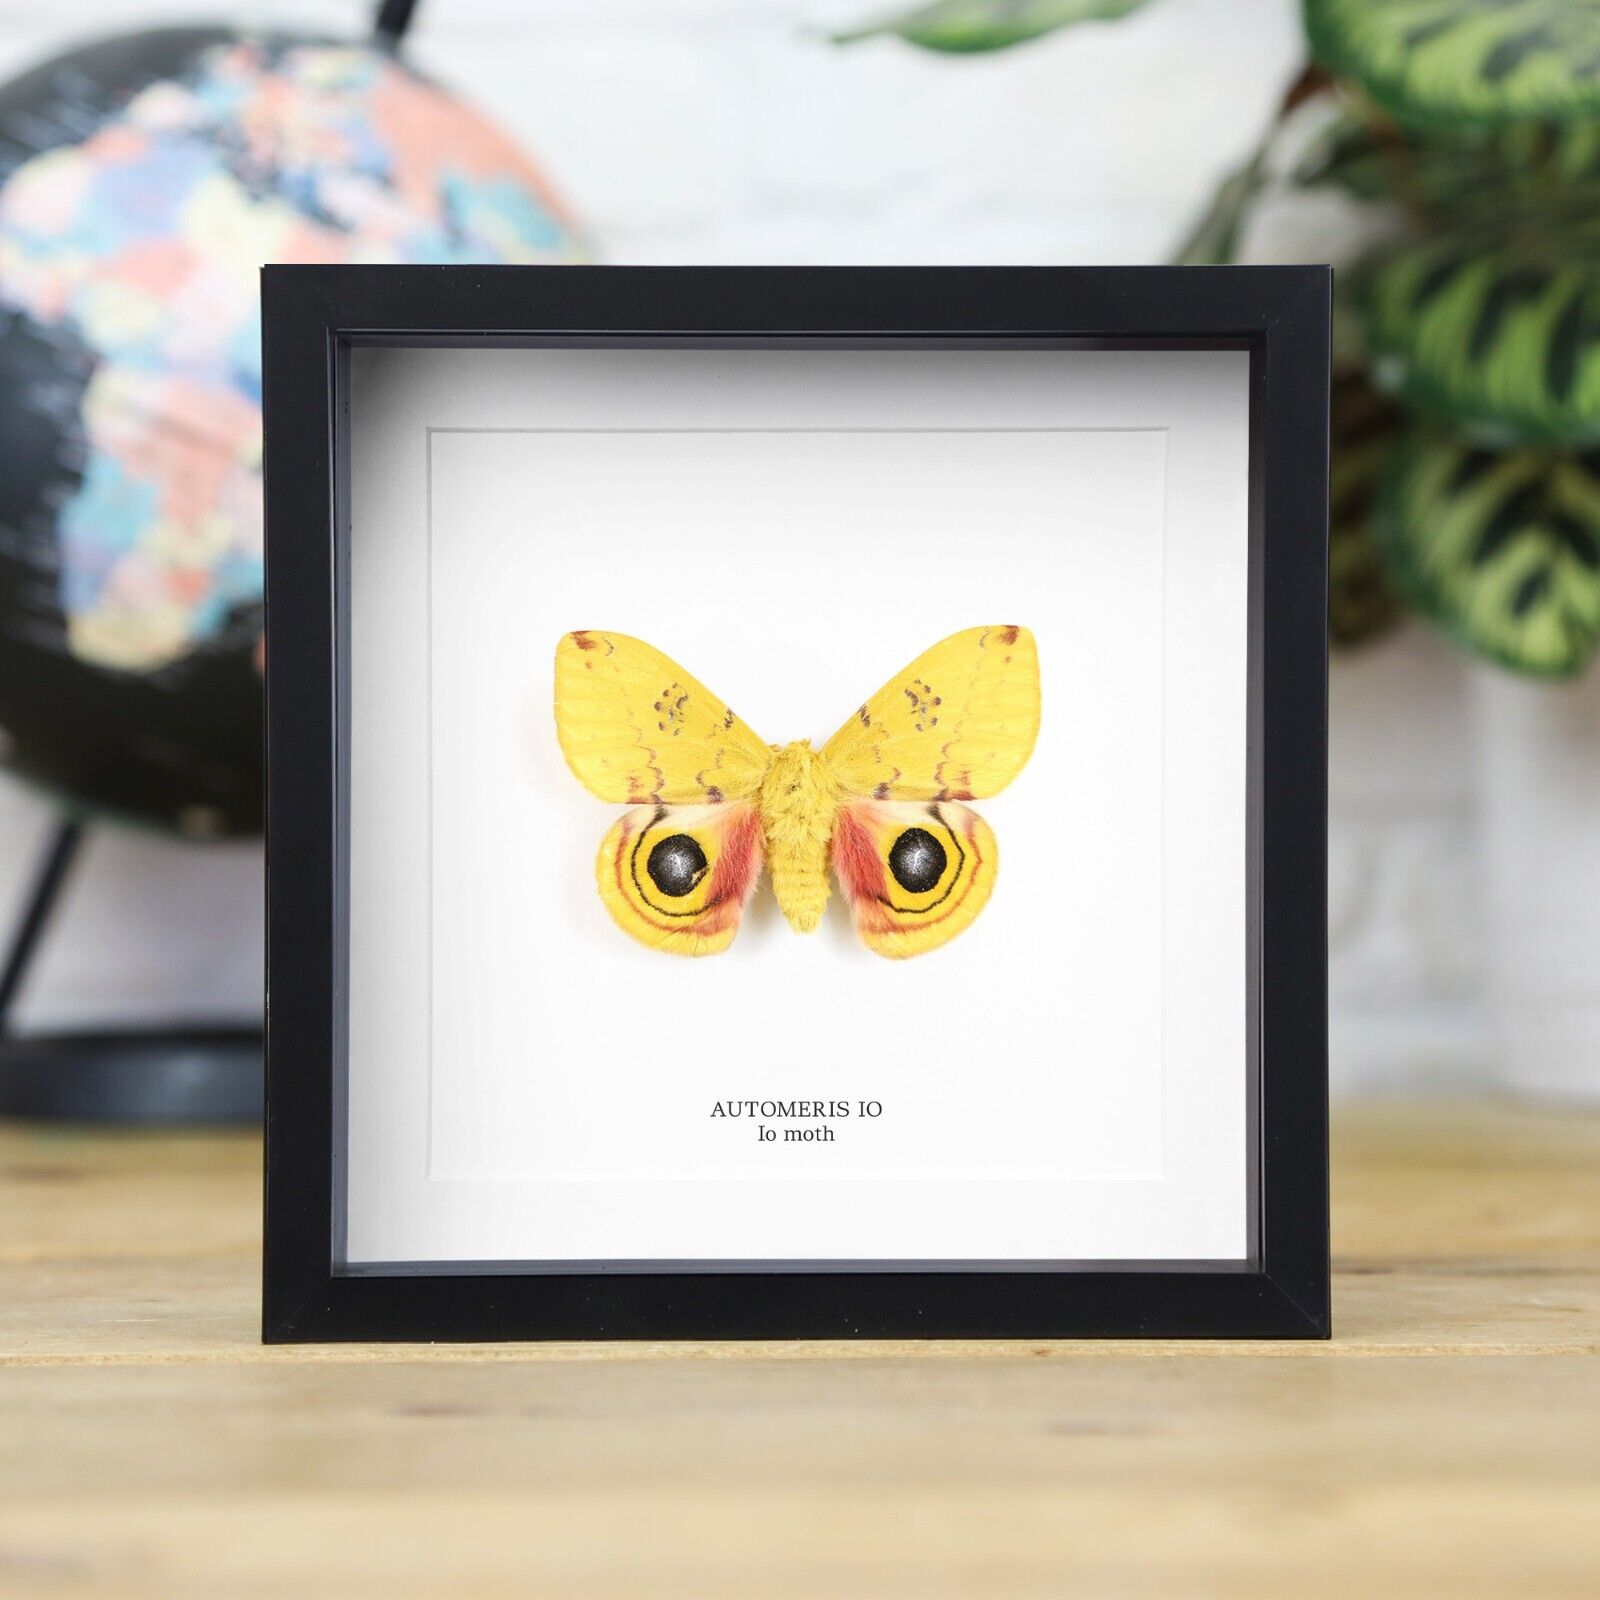 Io Moth Male (Automeris Io) Butterfly Home Decor Handcrafted Entomology Frame